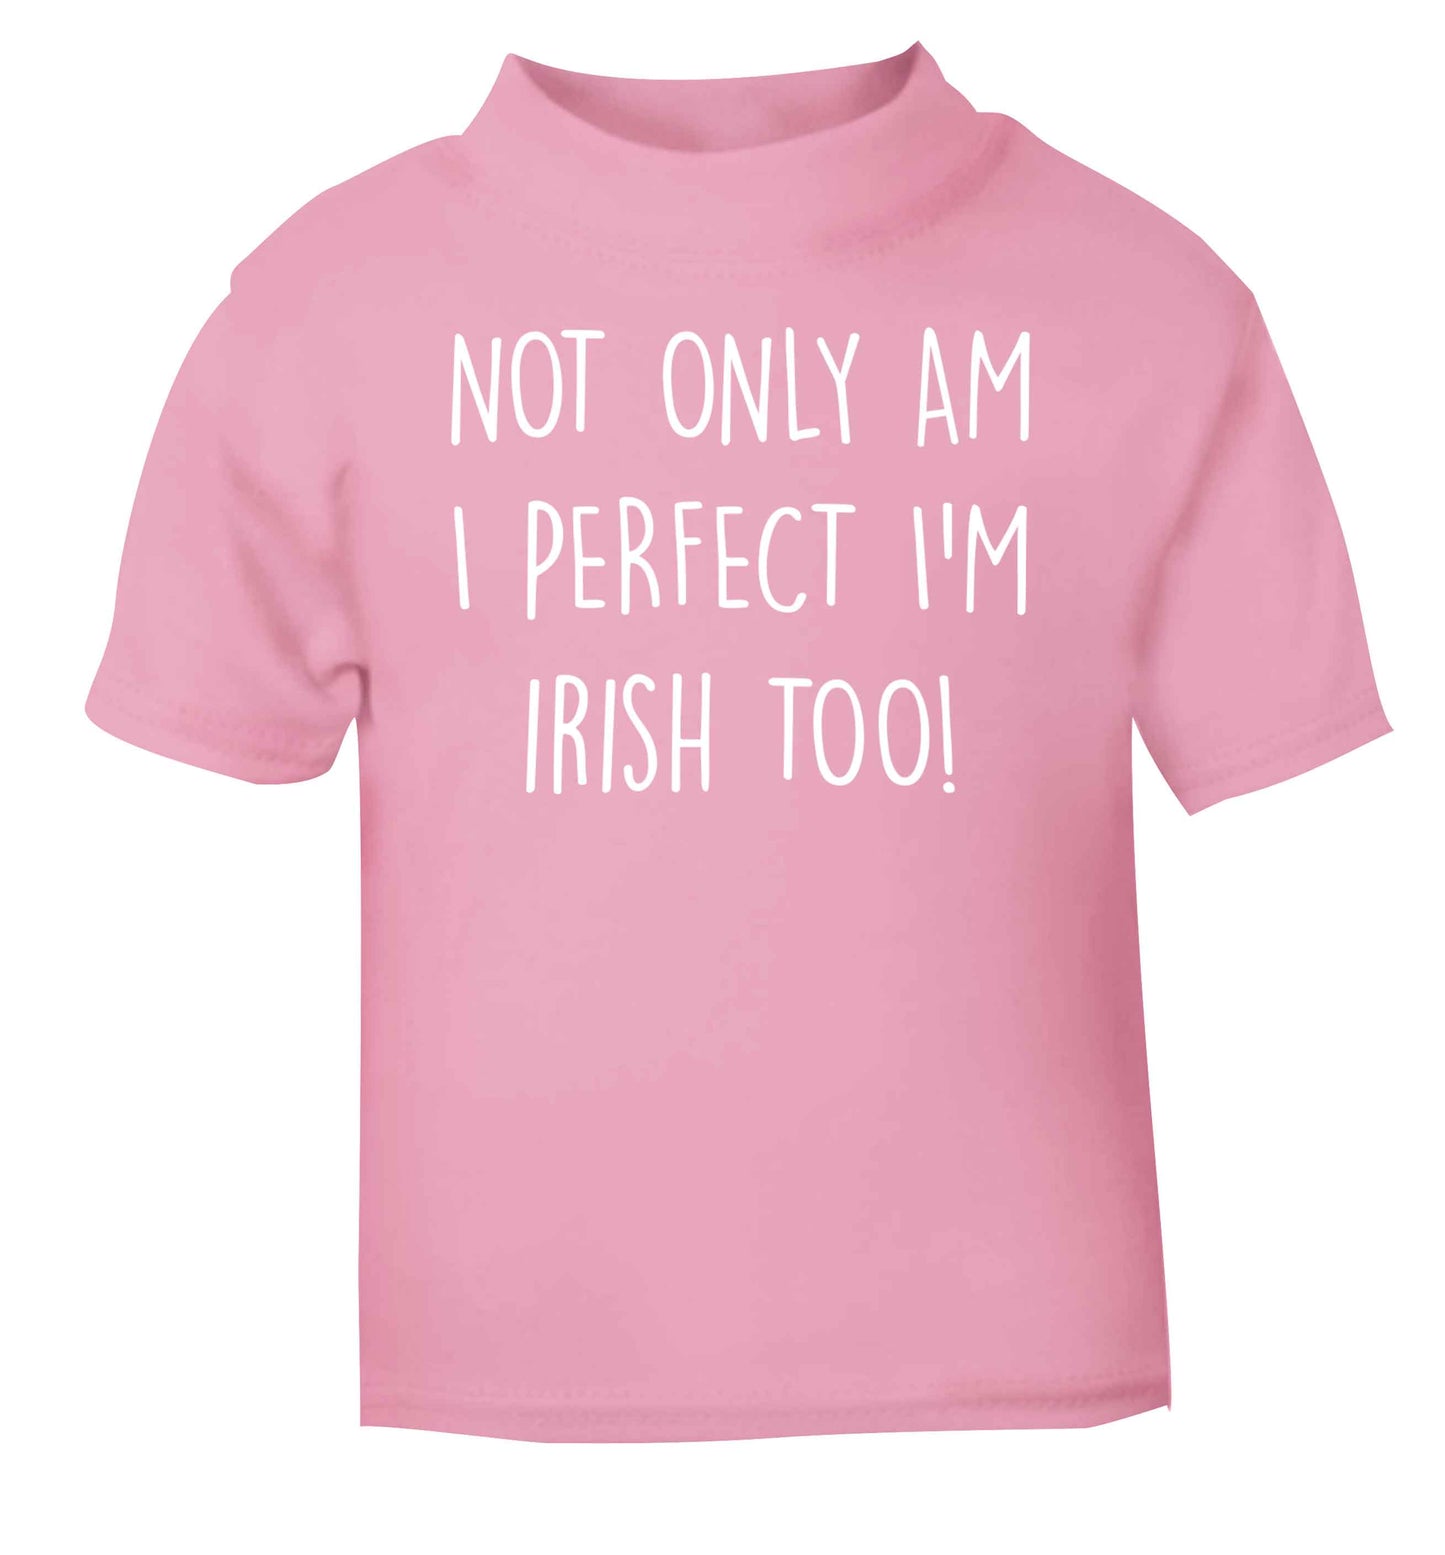 Not only am I perfect I'm Irish too! light pink baby toddler Tshirt 2 Years